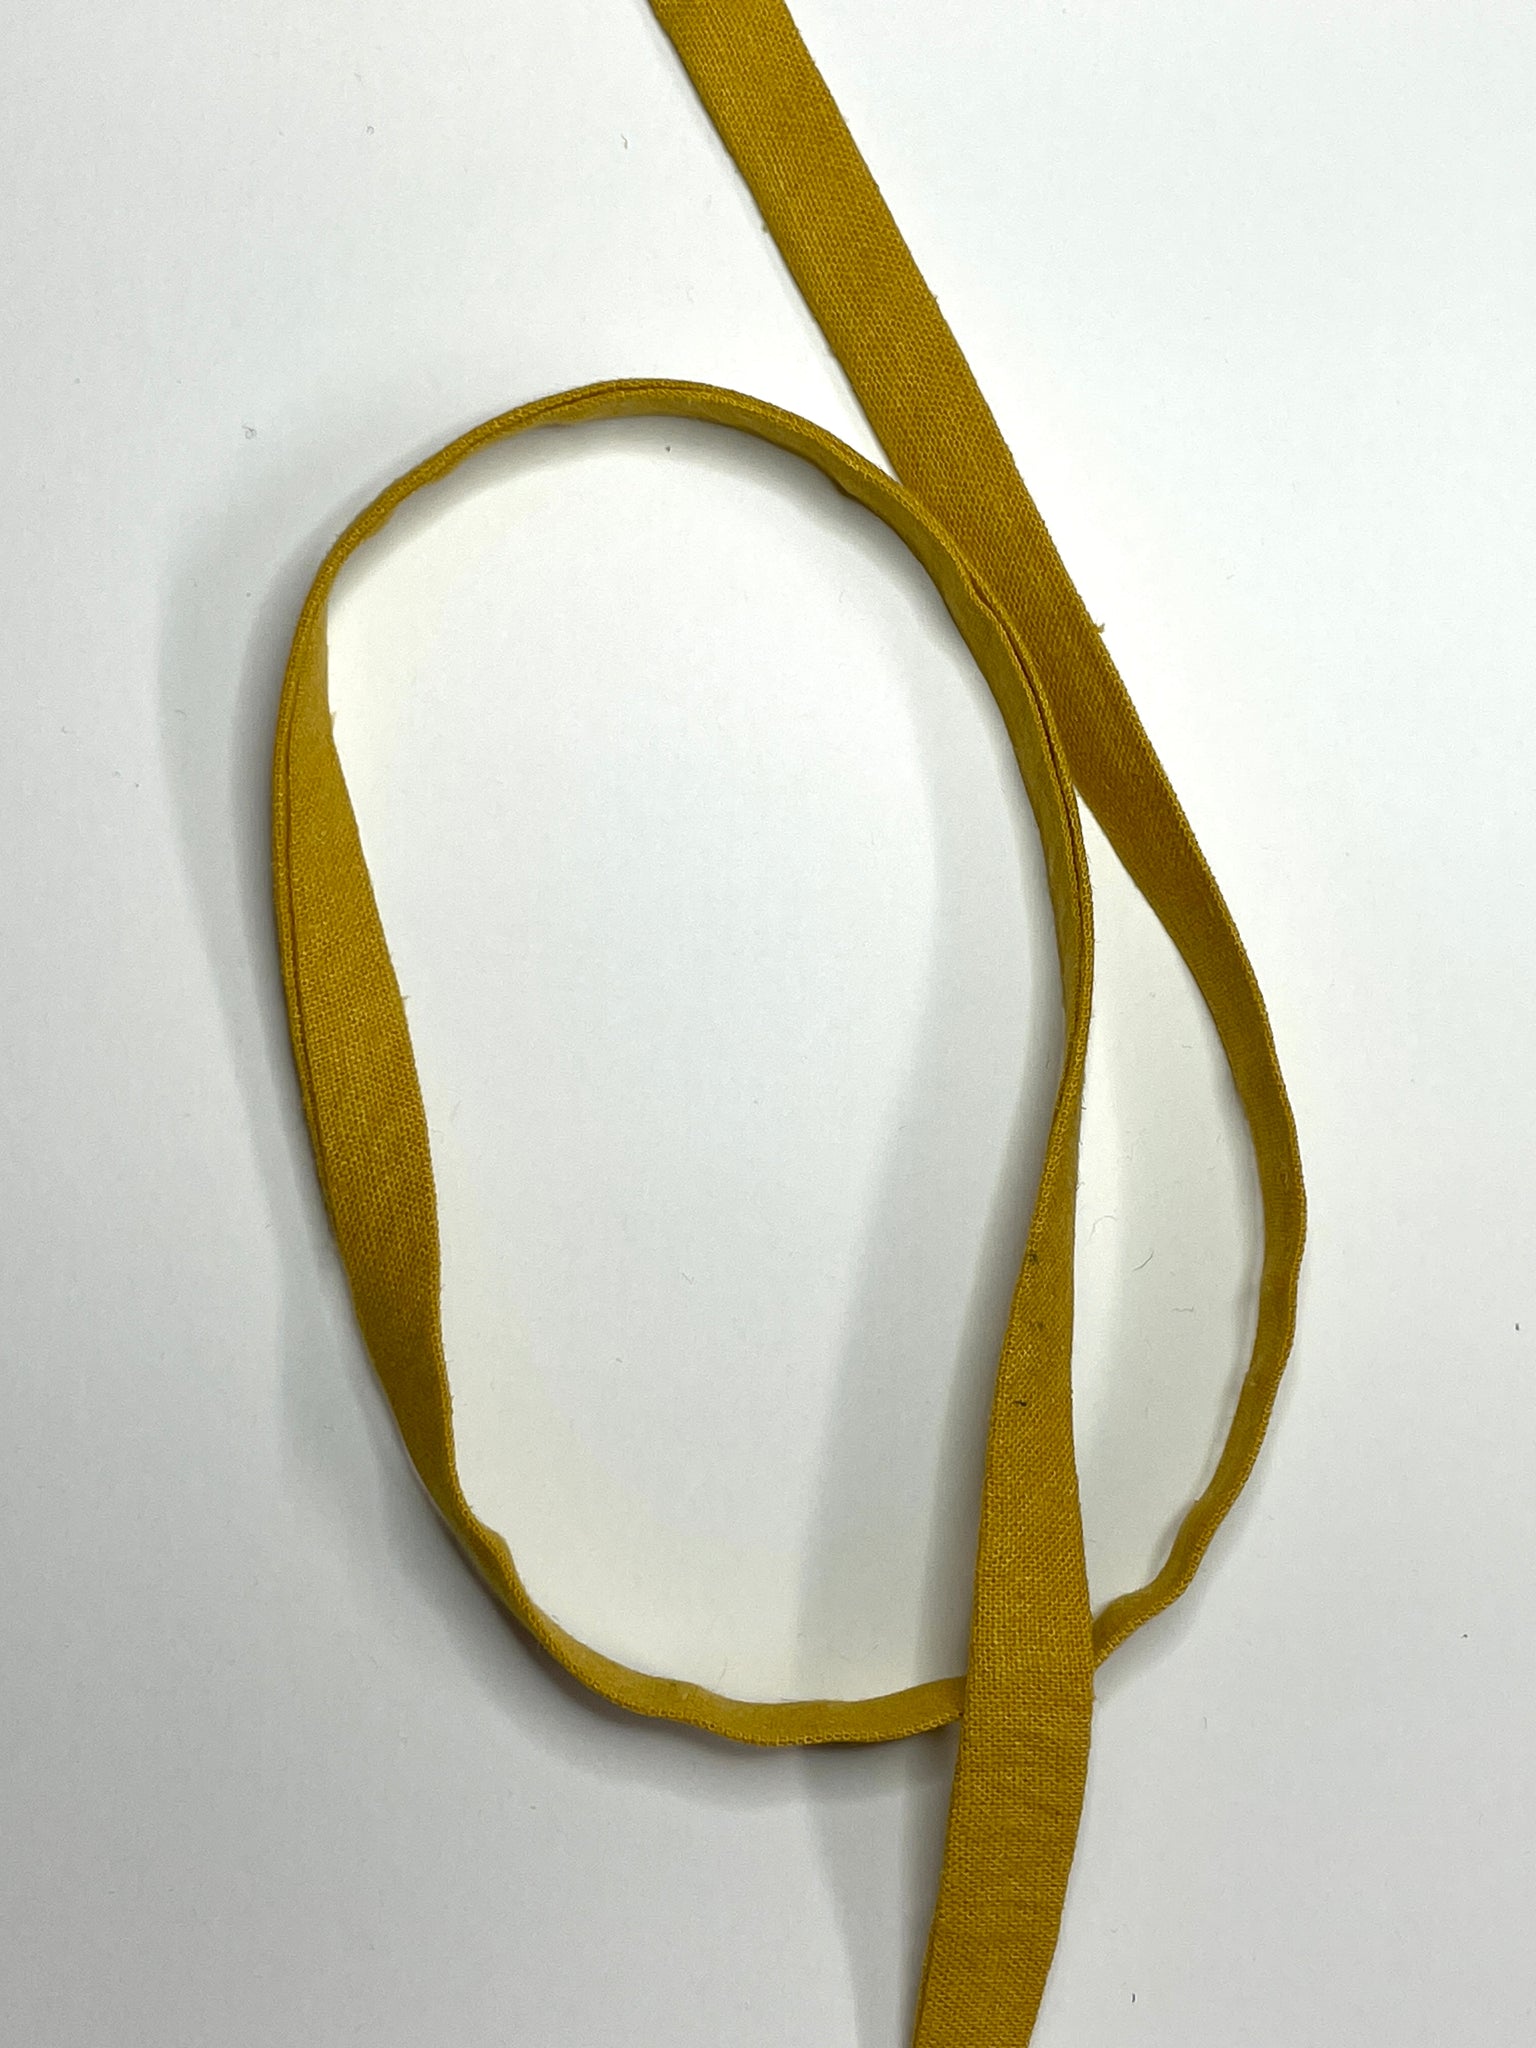 Pressed completed yellow waist tie